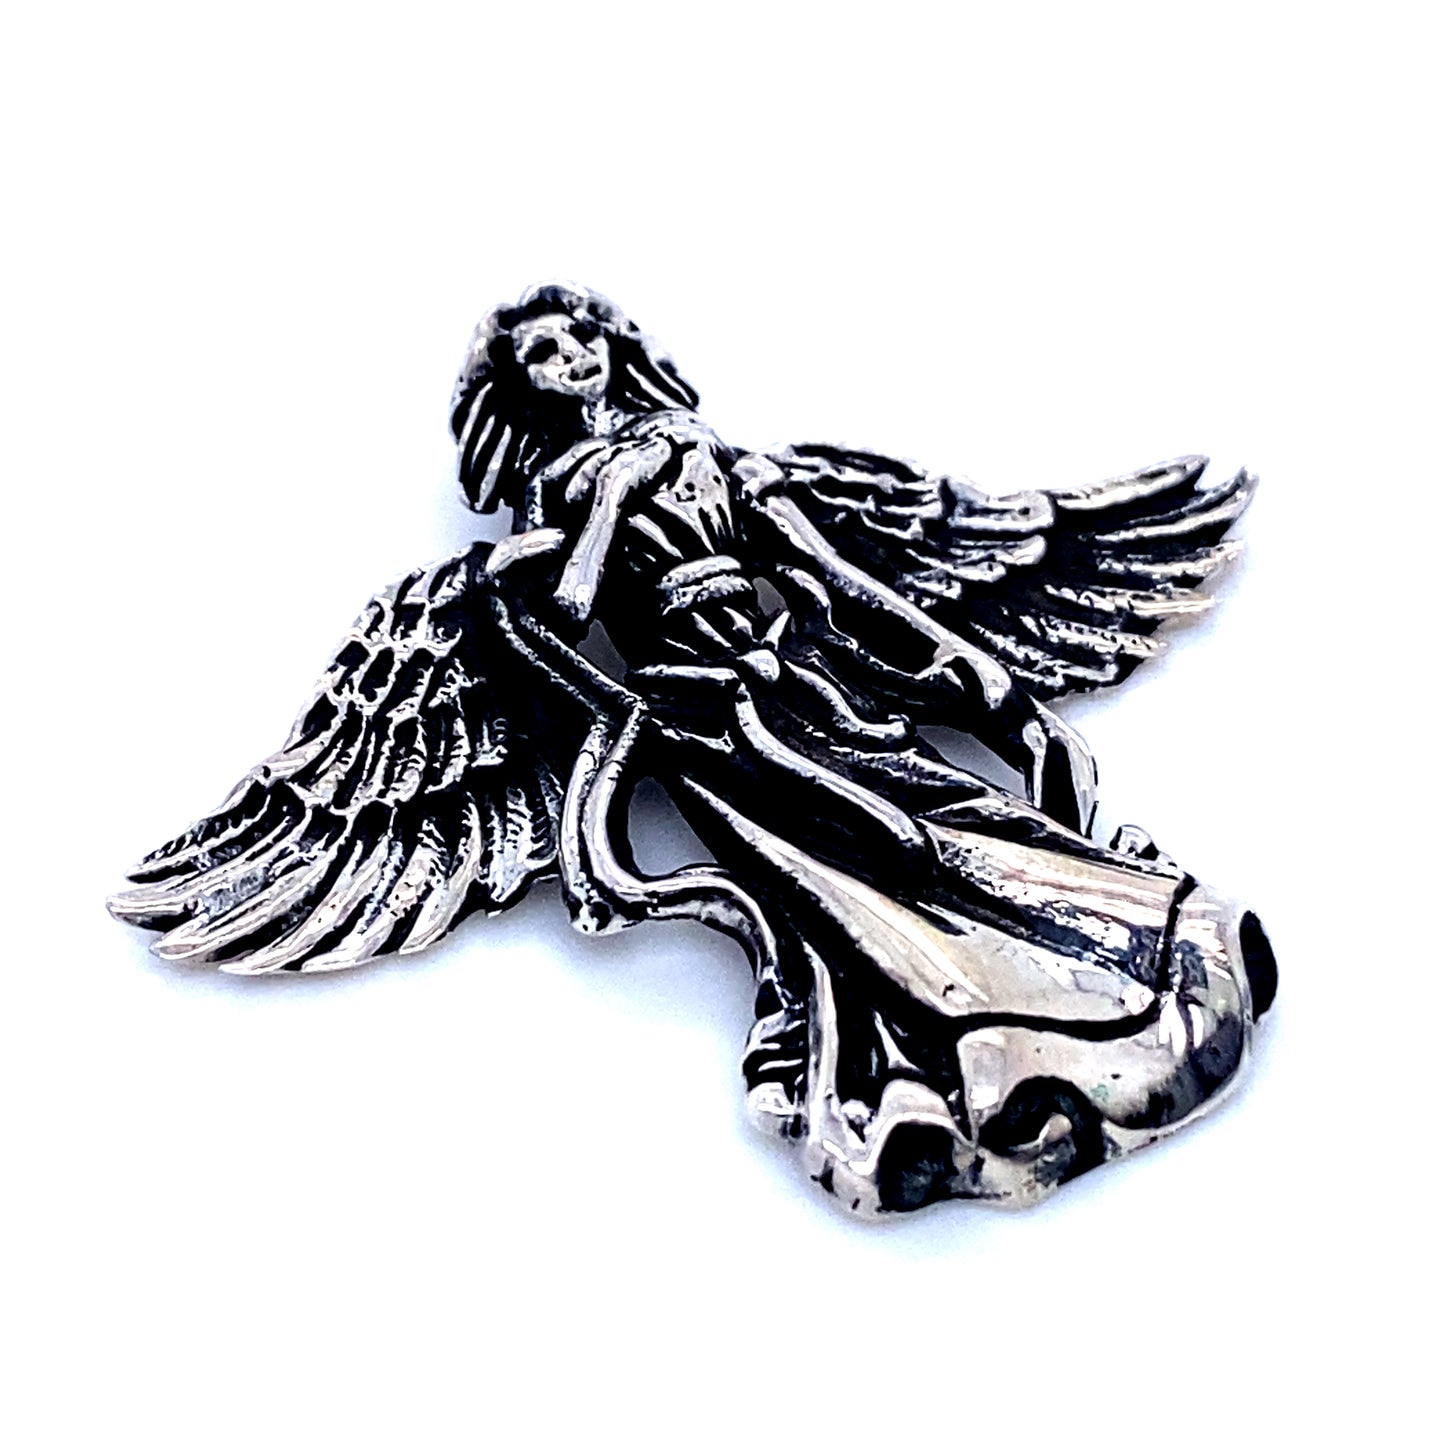 A Super Silver Flowing Angel Pendant With Hand Over Heart with wings on a white background.